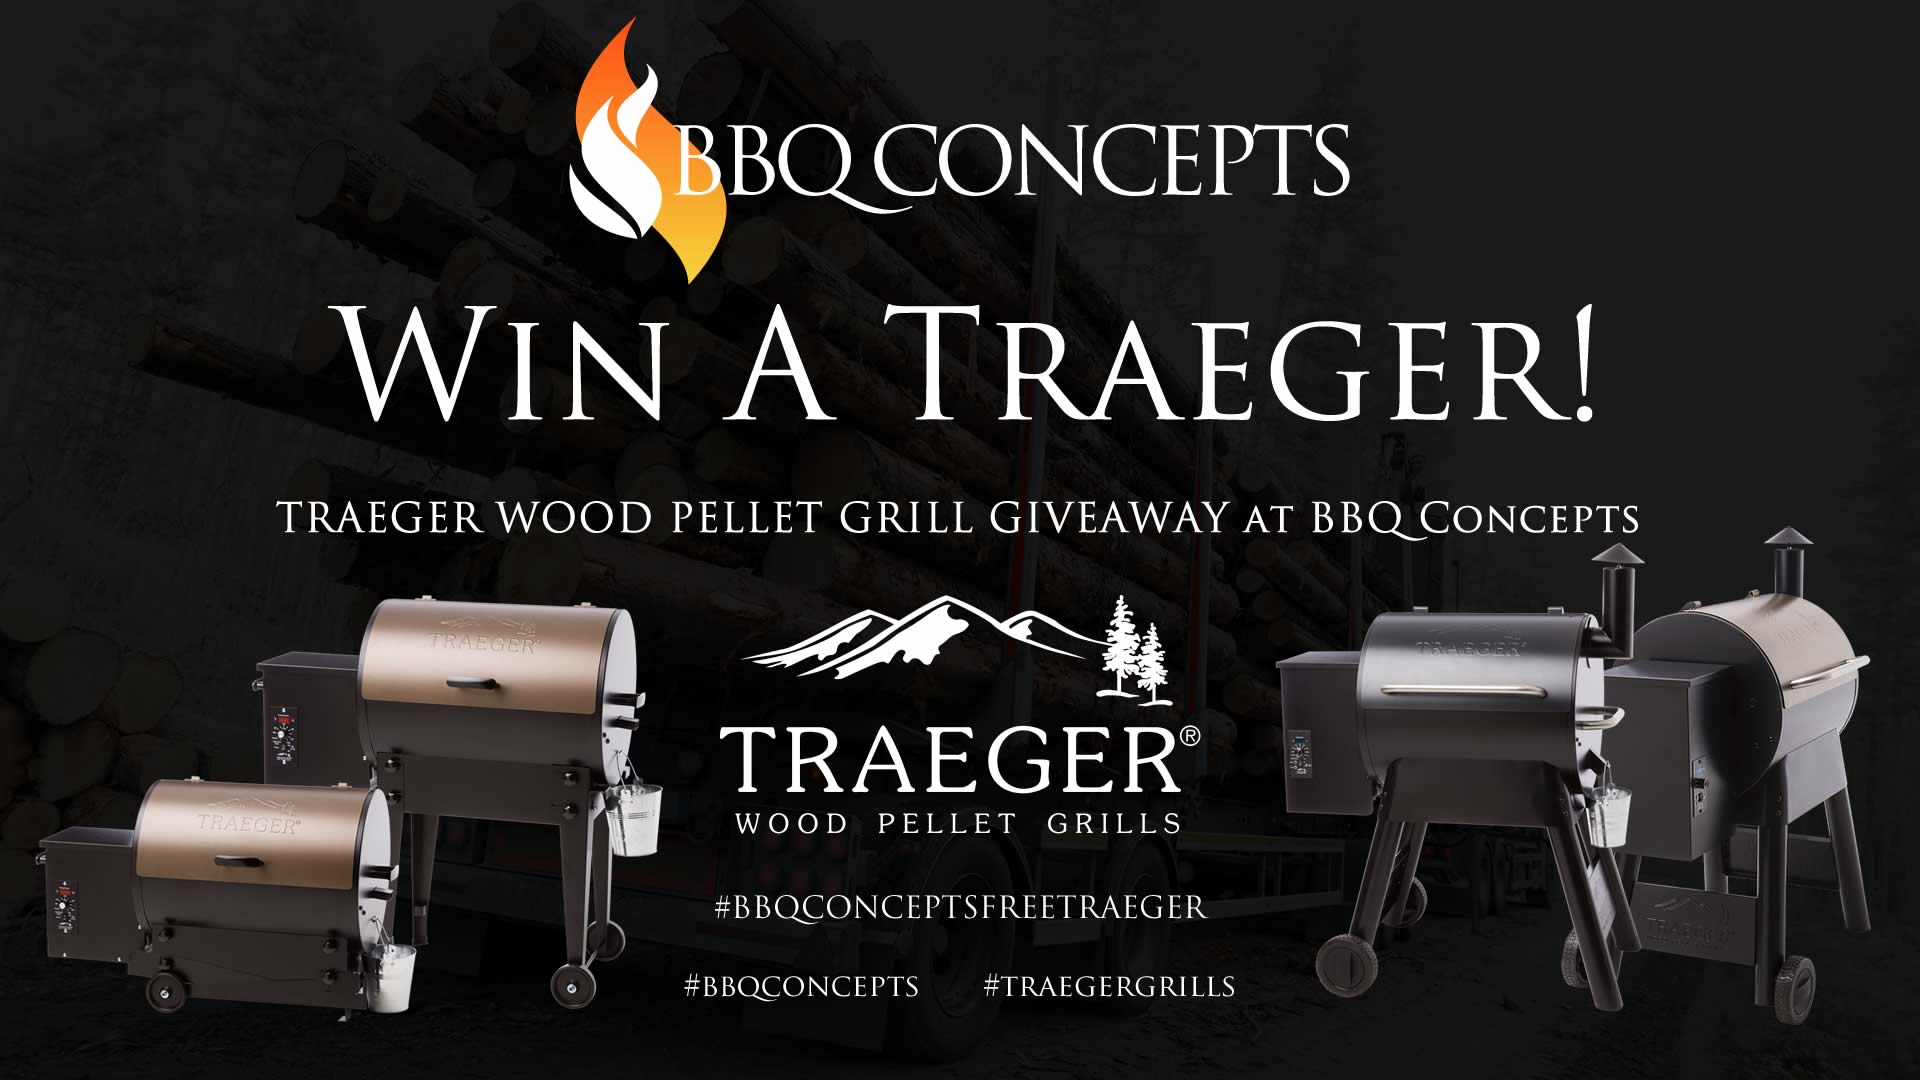 Traeger Day Giveaway Promotion Ad 1 - BBQ Concepts of Las Vegas, Nevada